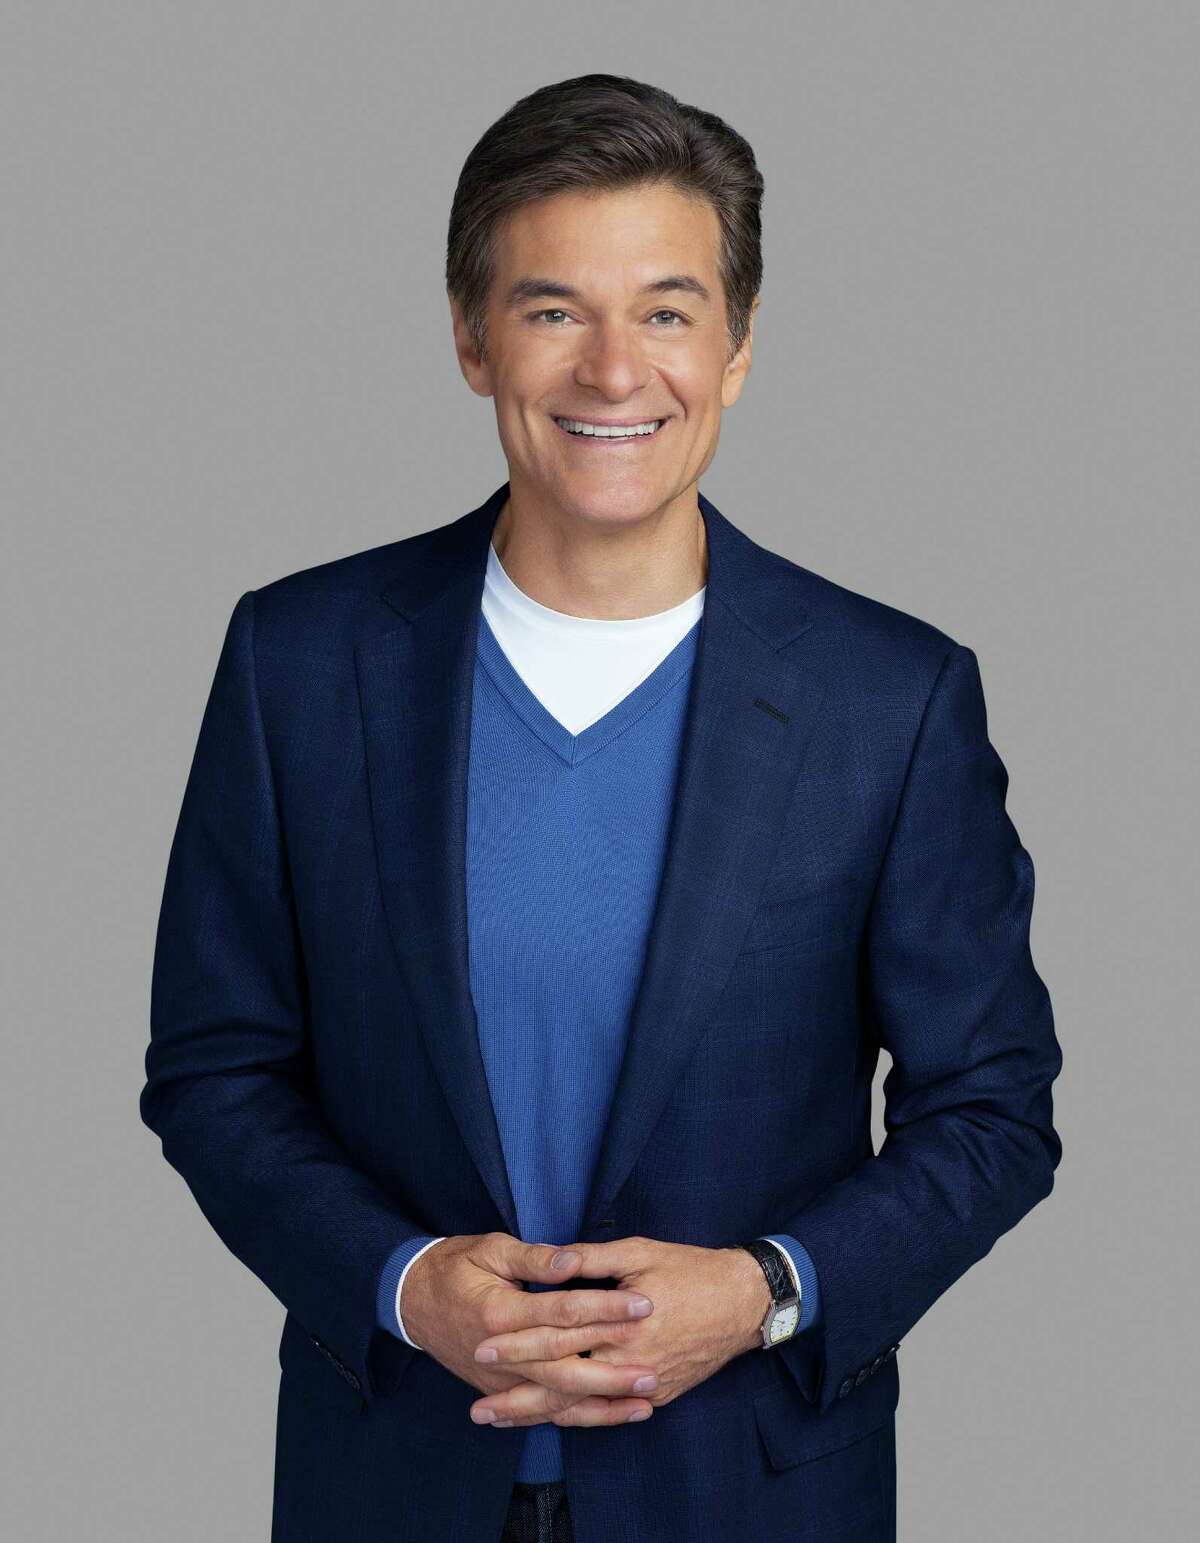 Dr. Mehmet Oz is the driving force behind the "National Night of Conversation" on Nov. 19. He wants parents to sit down with their children and talk about drugs.